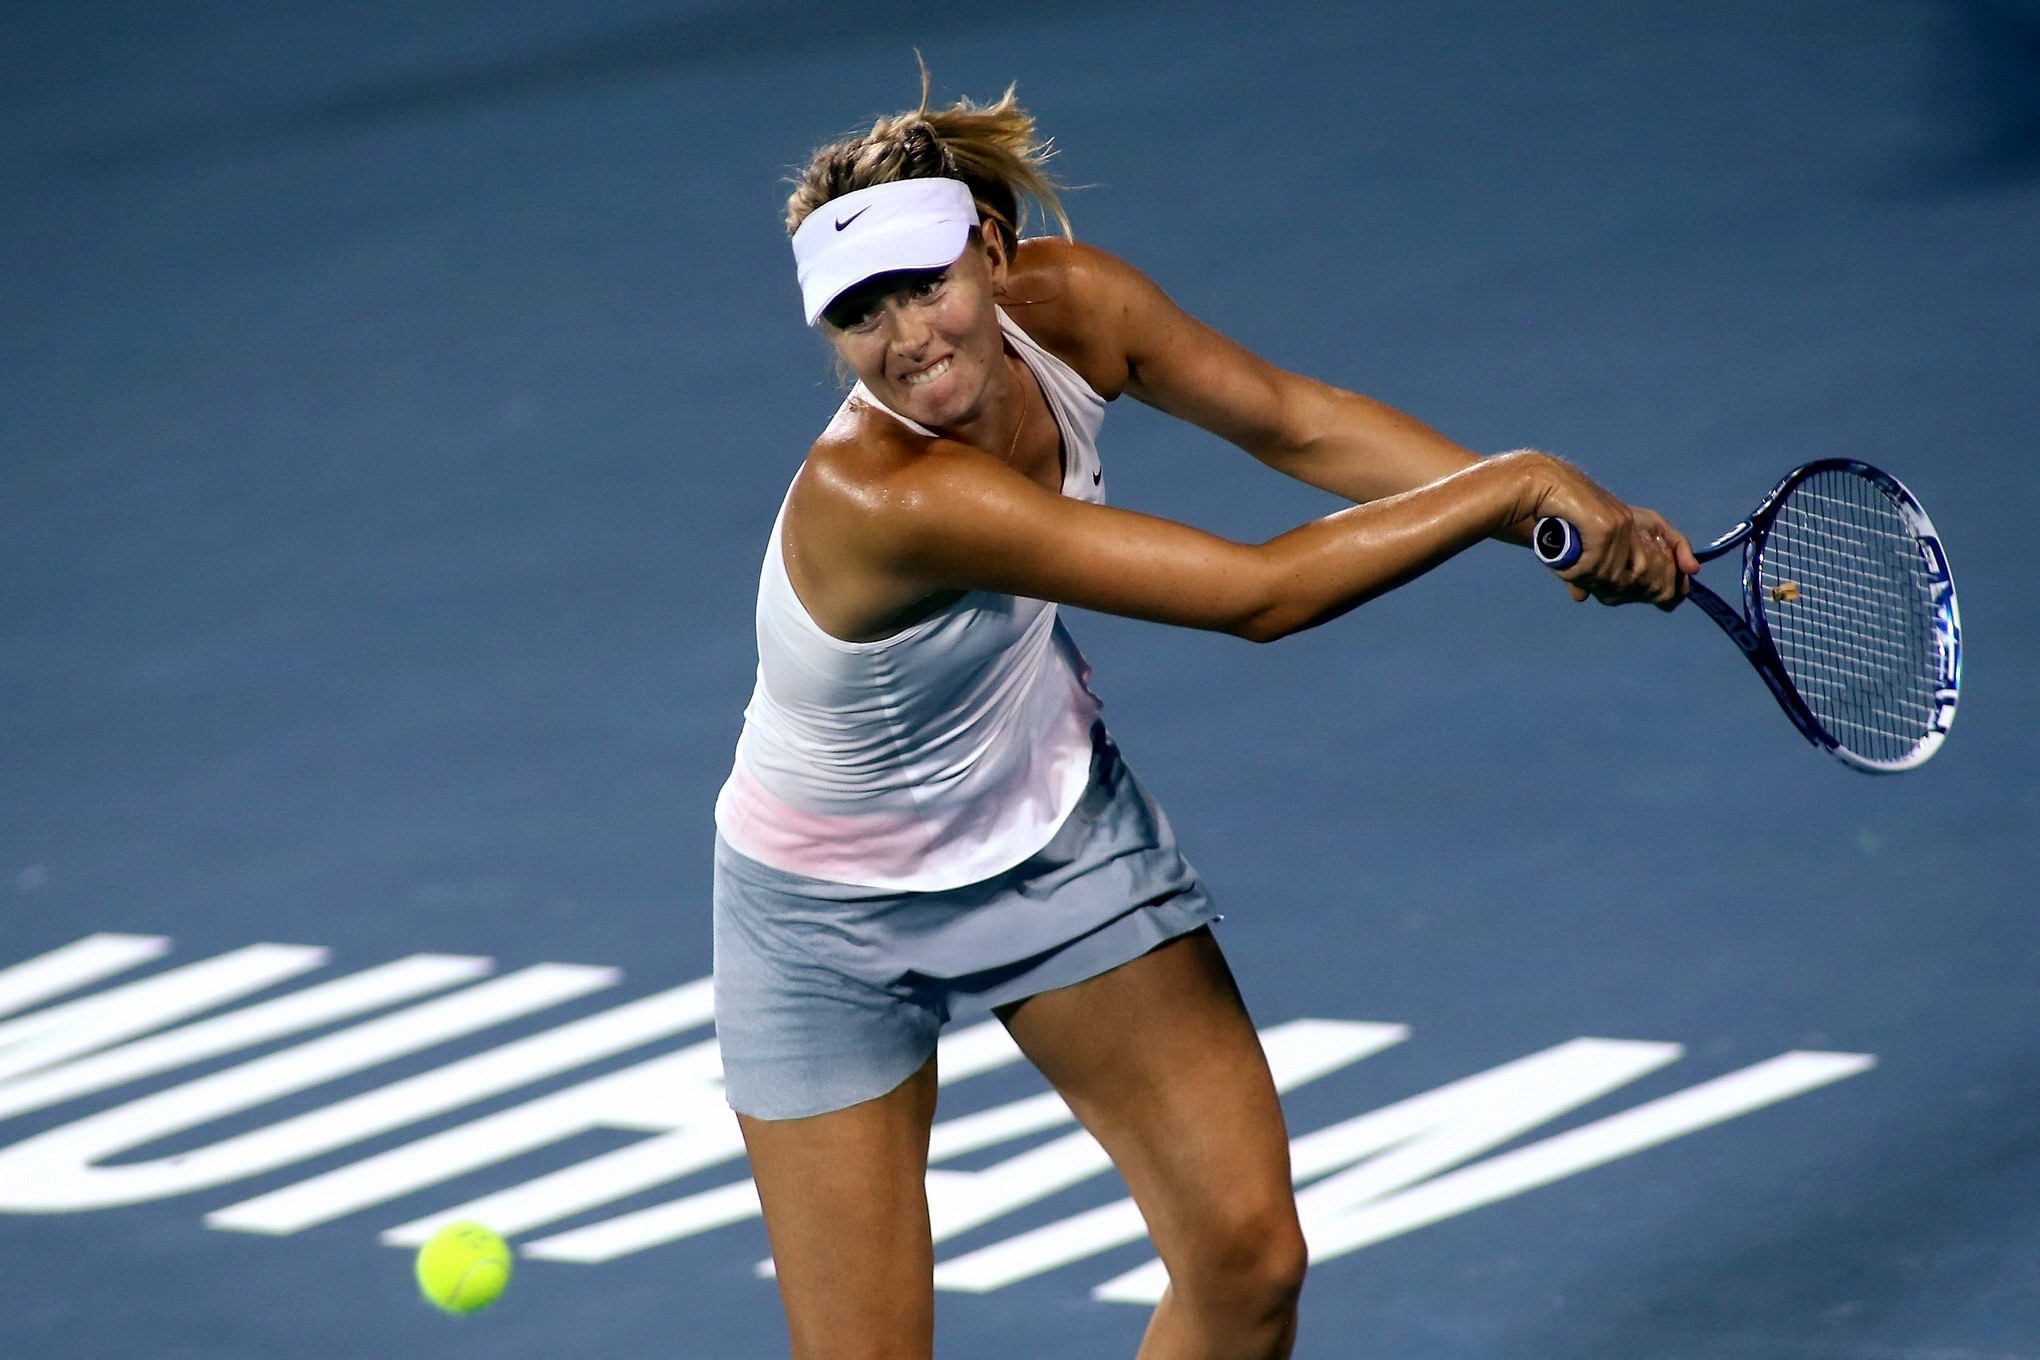 Maria Sharapova upskirt at the 2014 Dongfeng Motor Wuhan Open in China #75184941